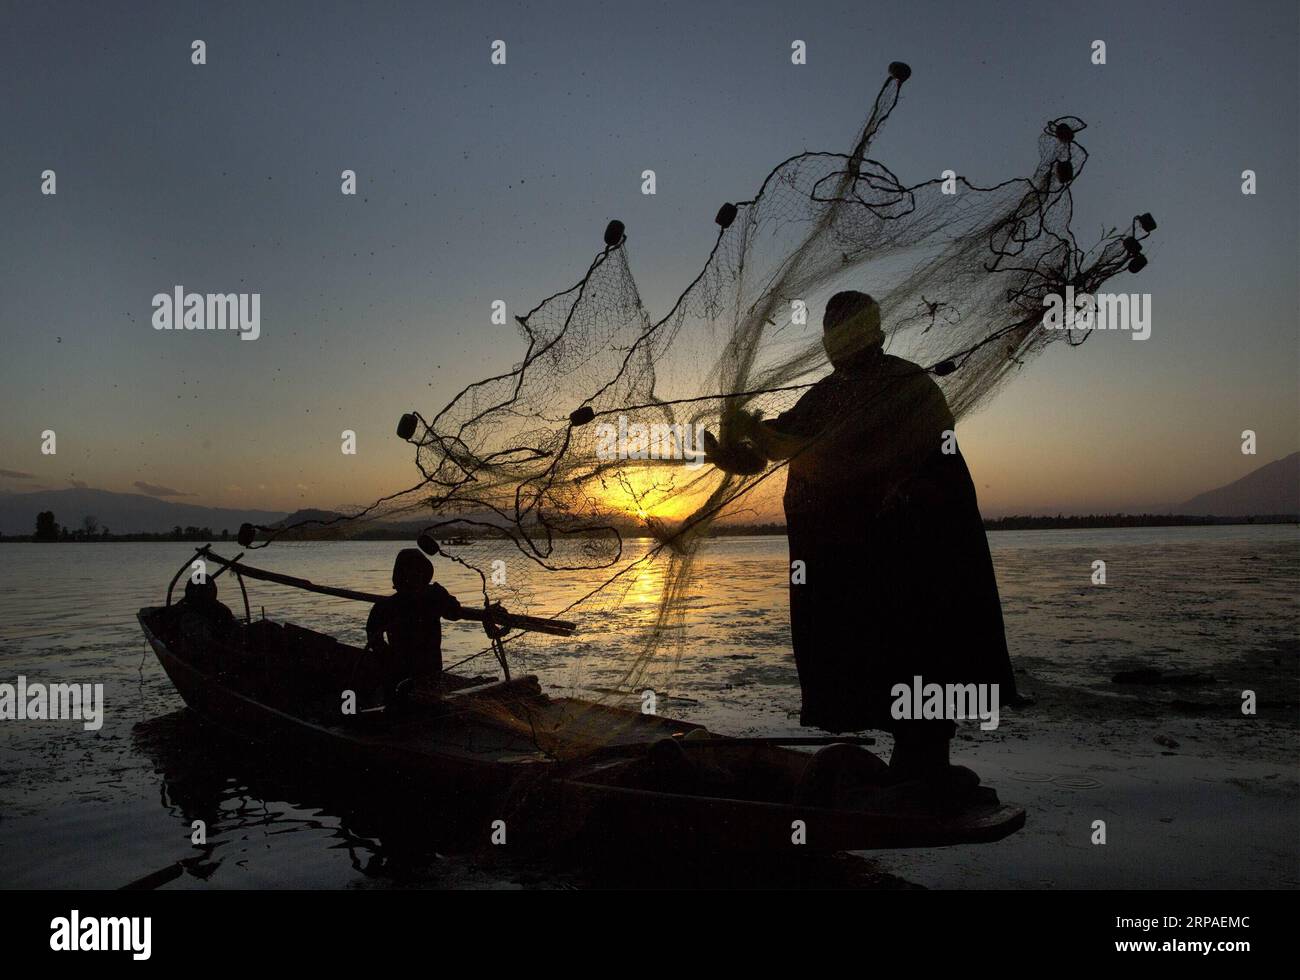 A fisherman casts his net in Dal Lake on a cloudy evening in